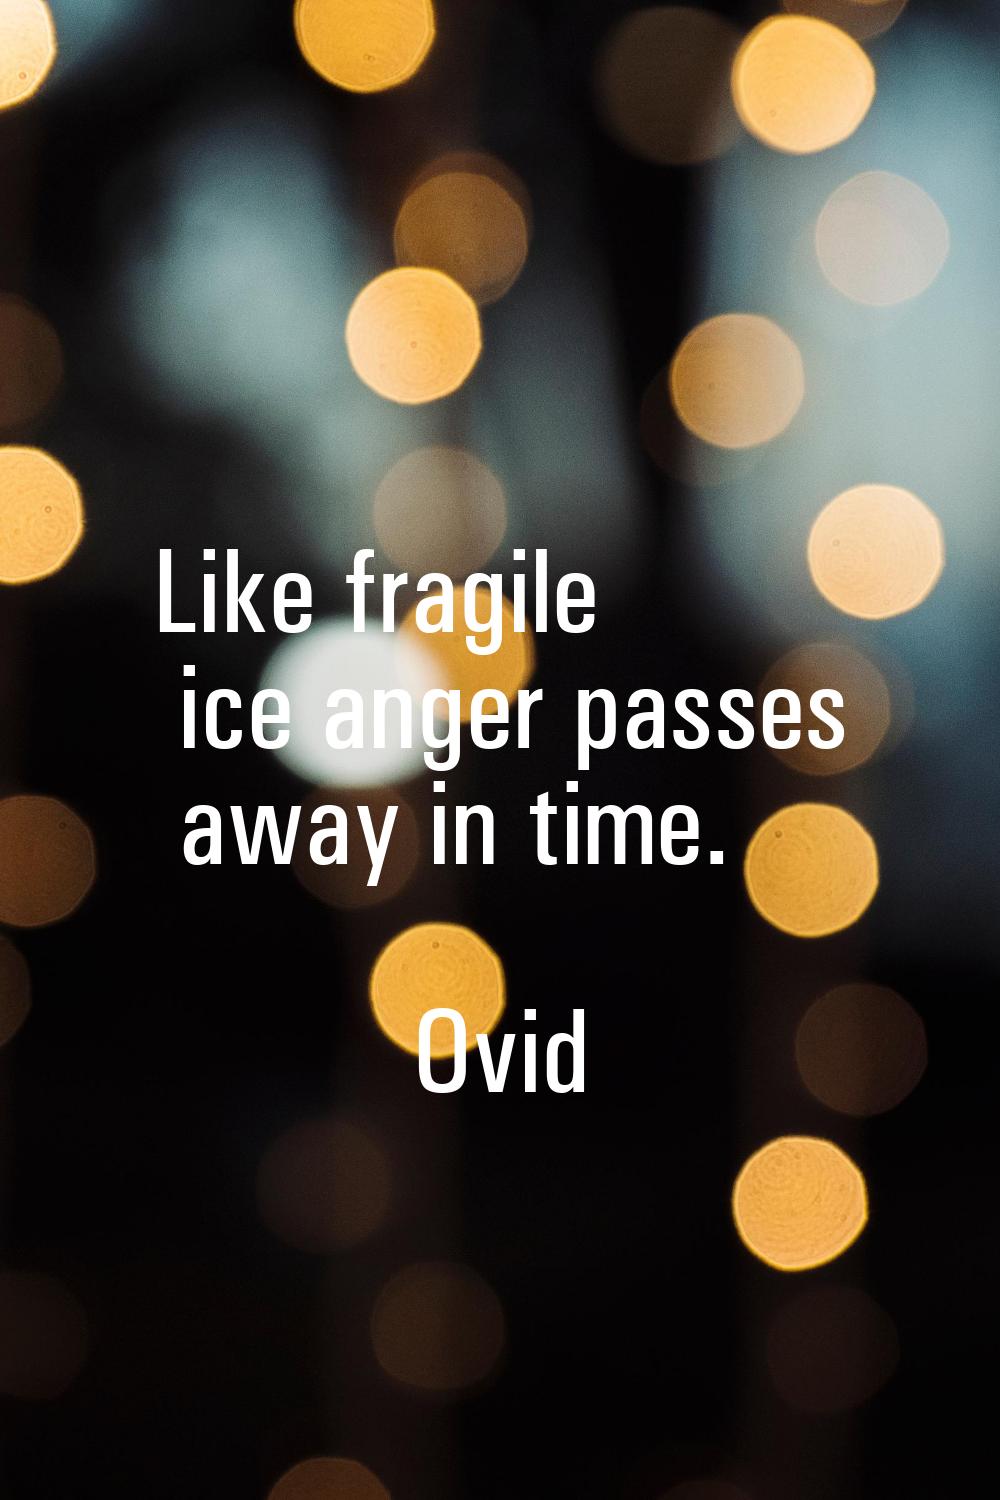 Like fragile ice anger passes away in time.